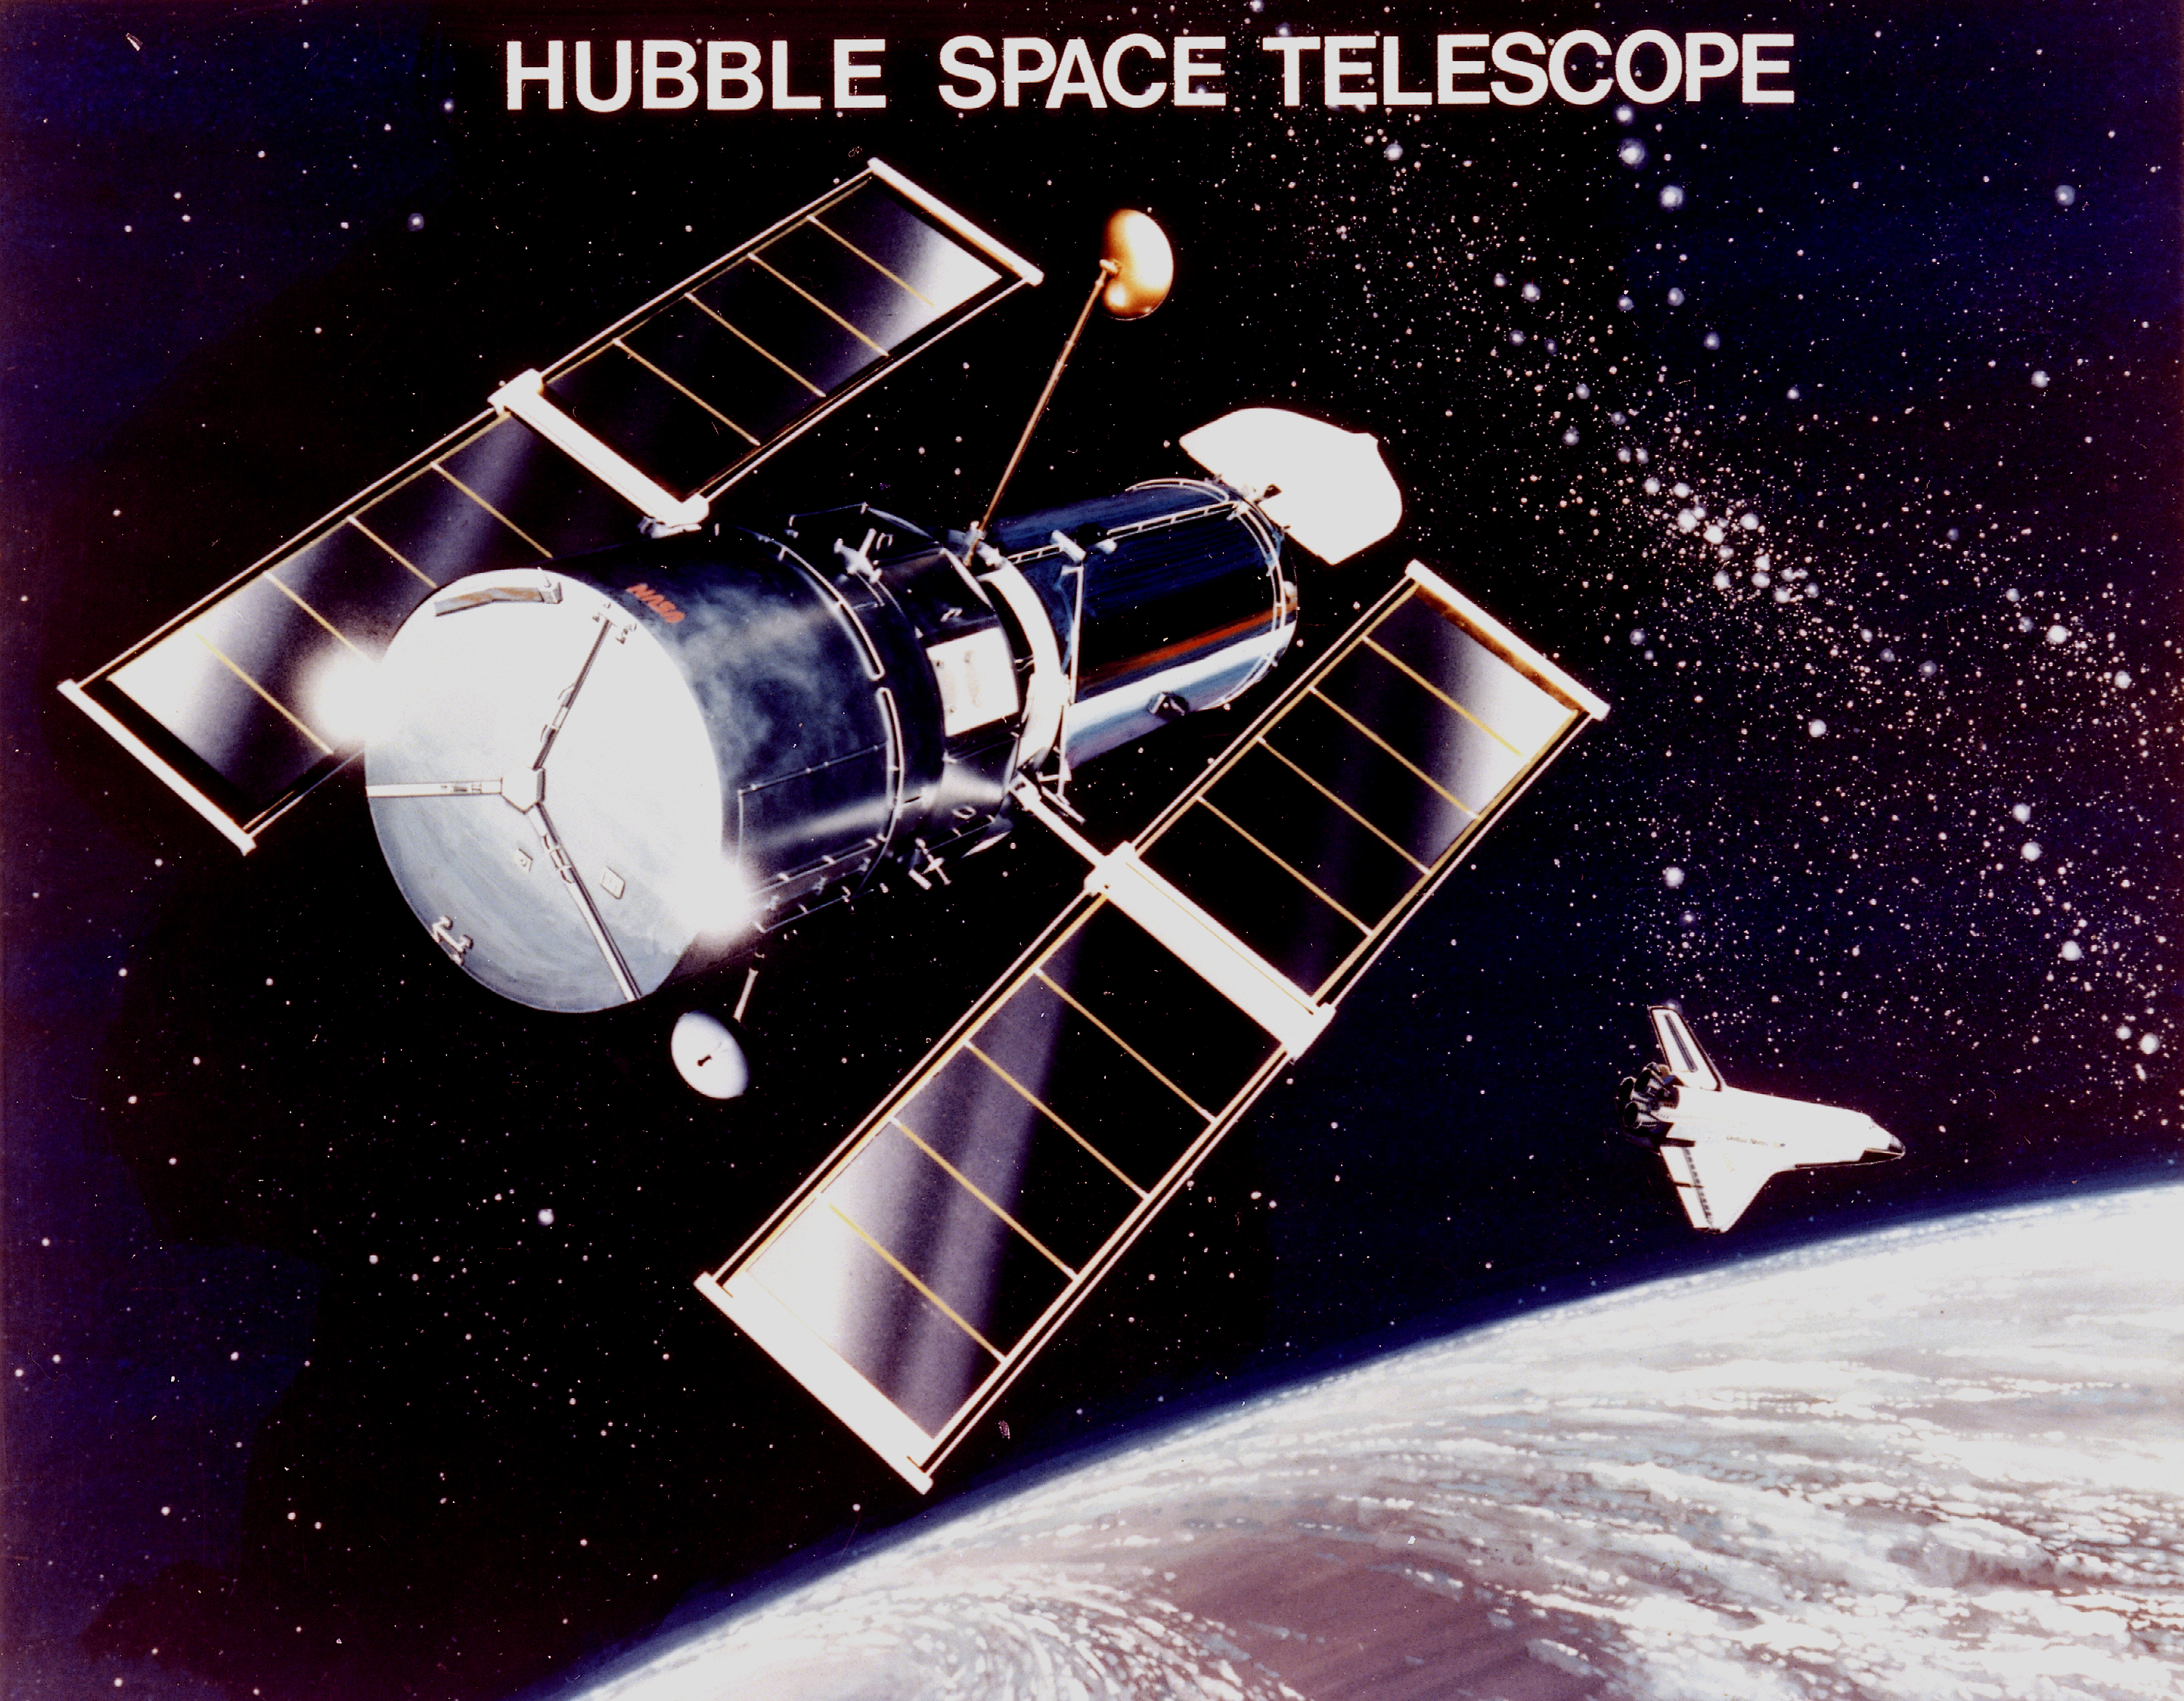 Drawing of the Hubble Space Telescope flying over the earth with the space shuttle in the background.